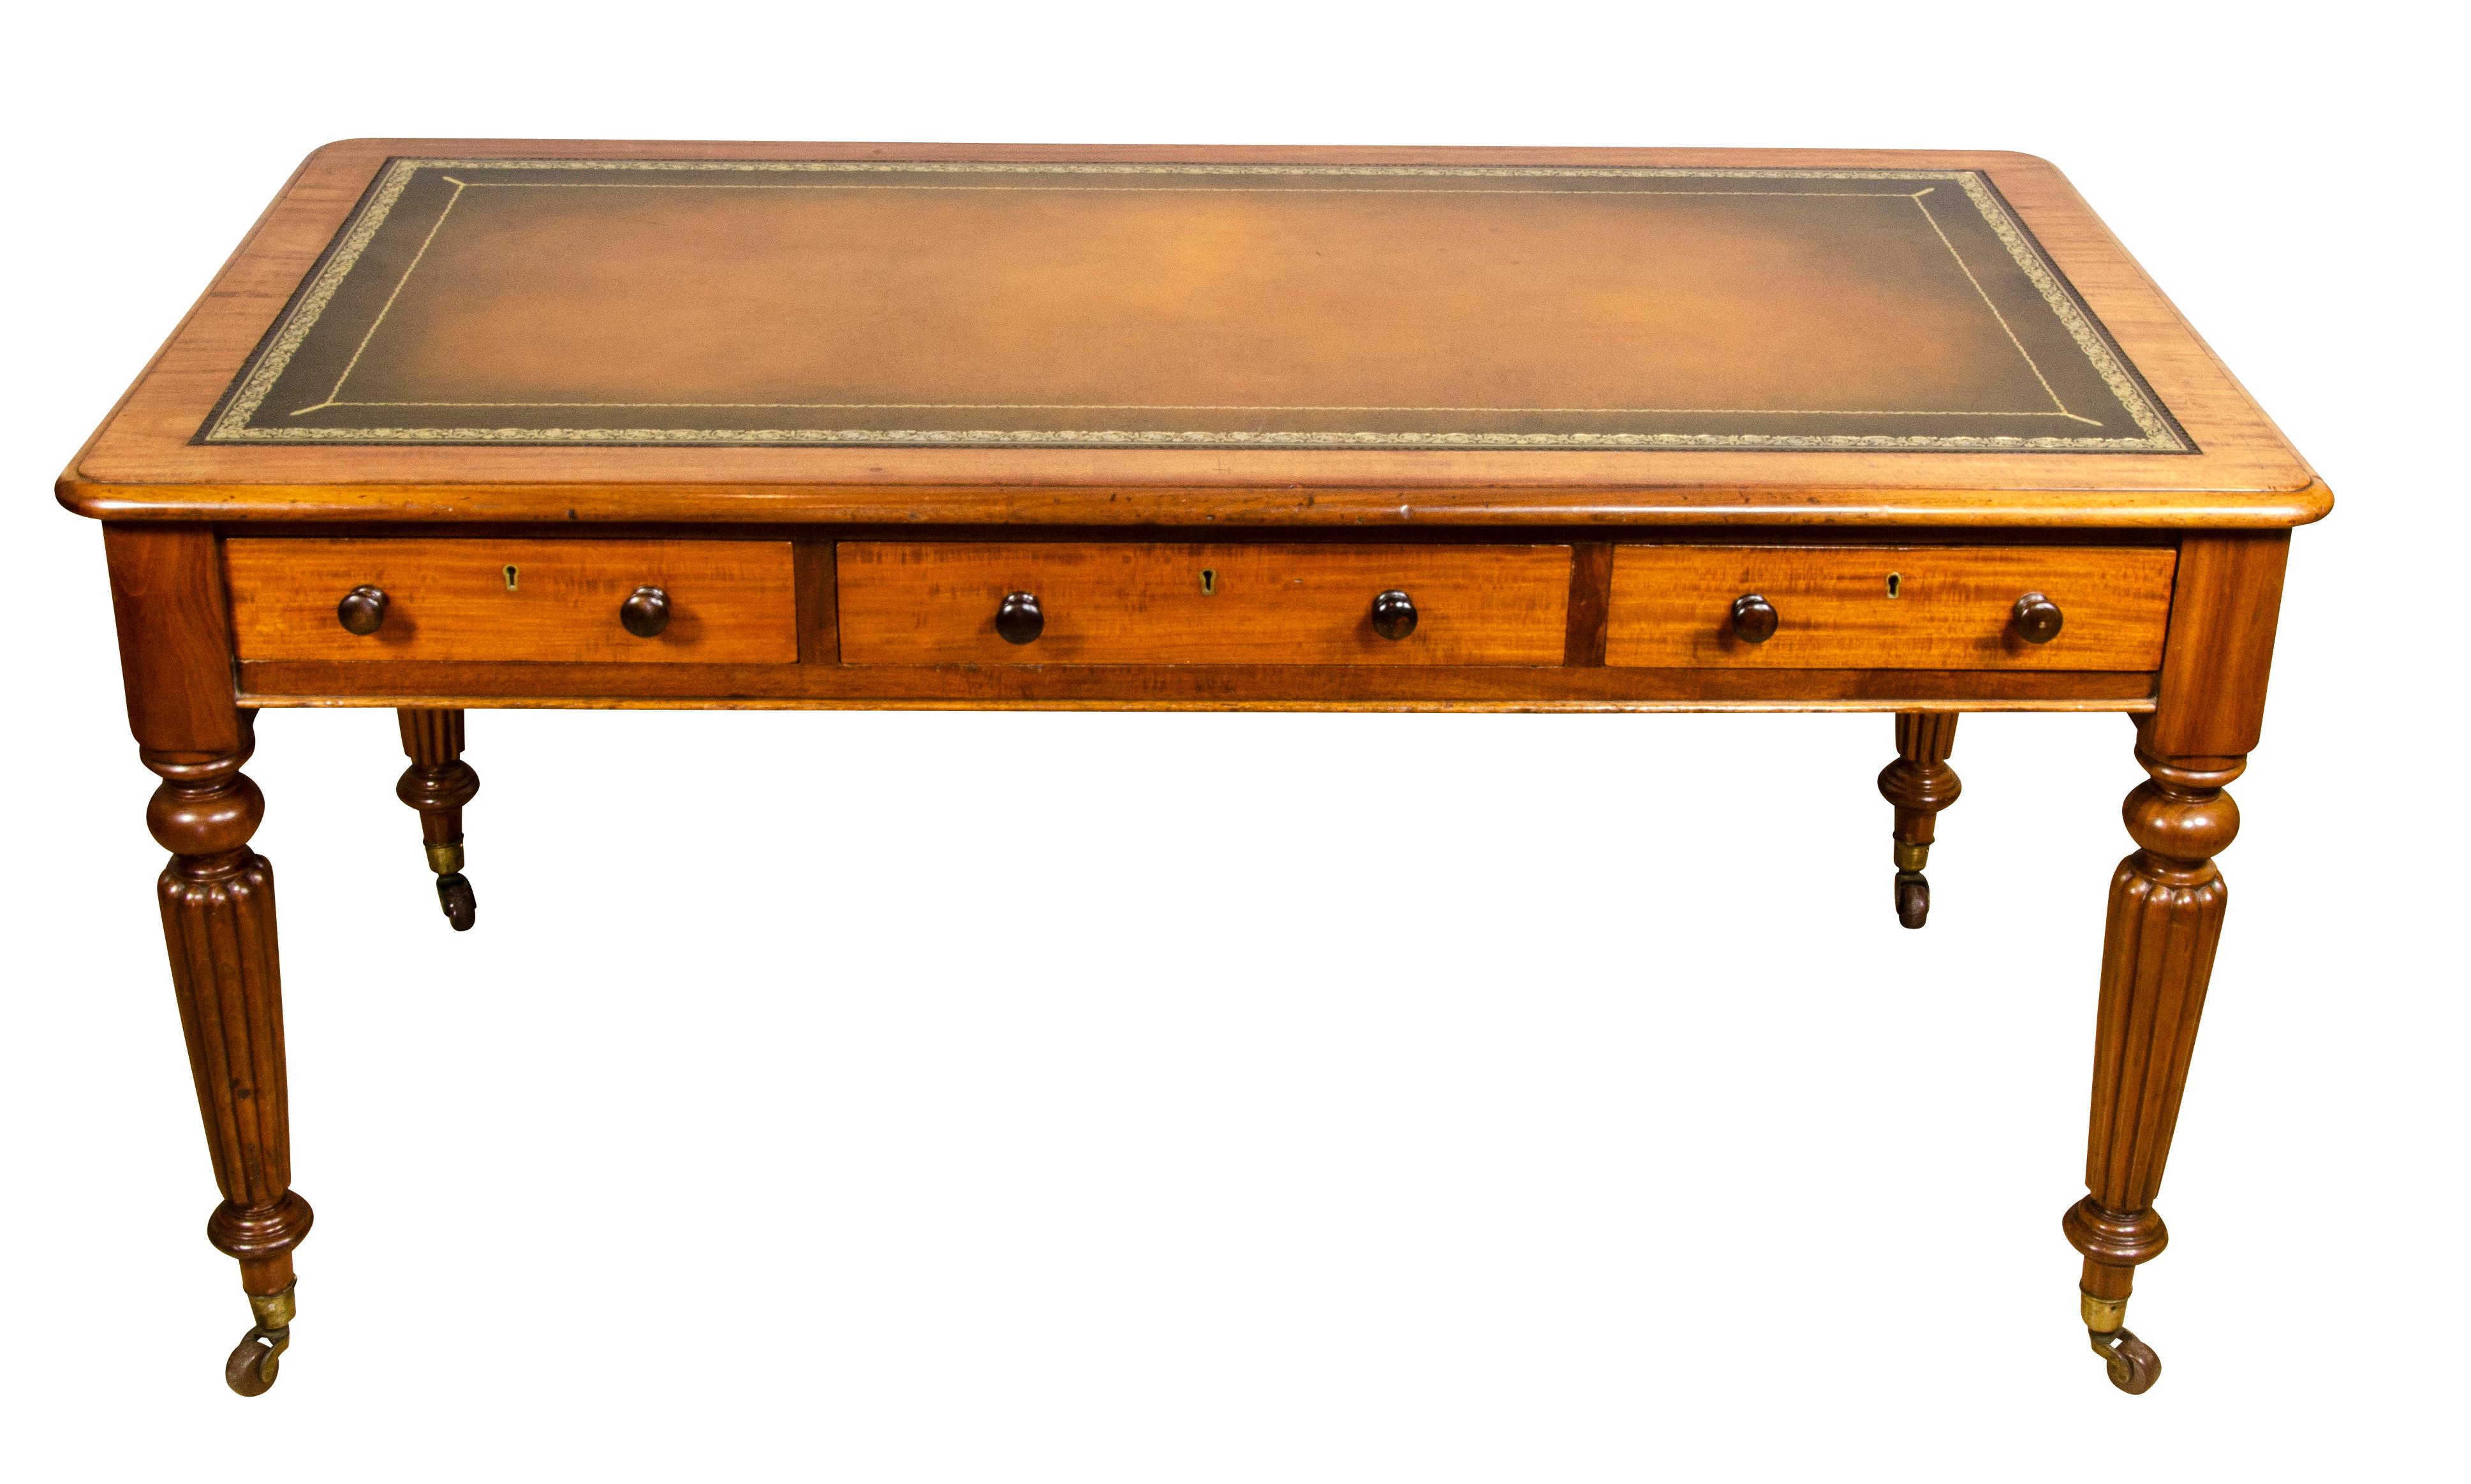 By W.Priest, London. Stamped in top of drawer. With tooled leather top with wood borders and rounded molded edge over drawers and raised on circular tapered reeded legs ending on casters.